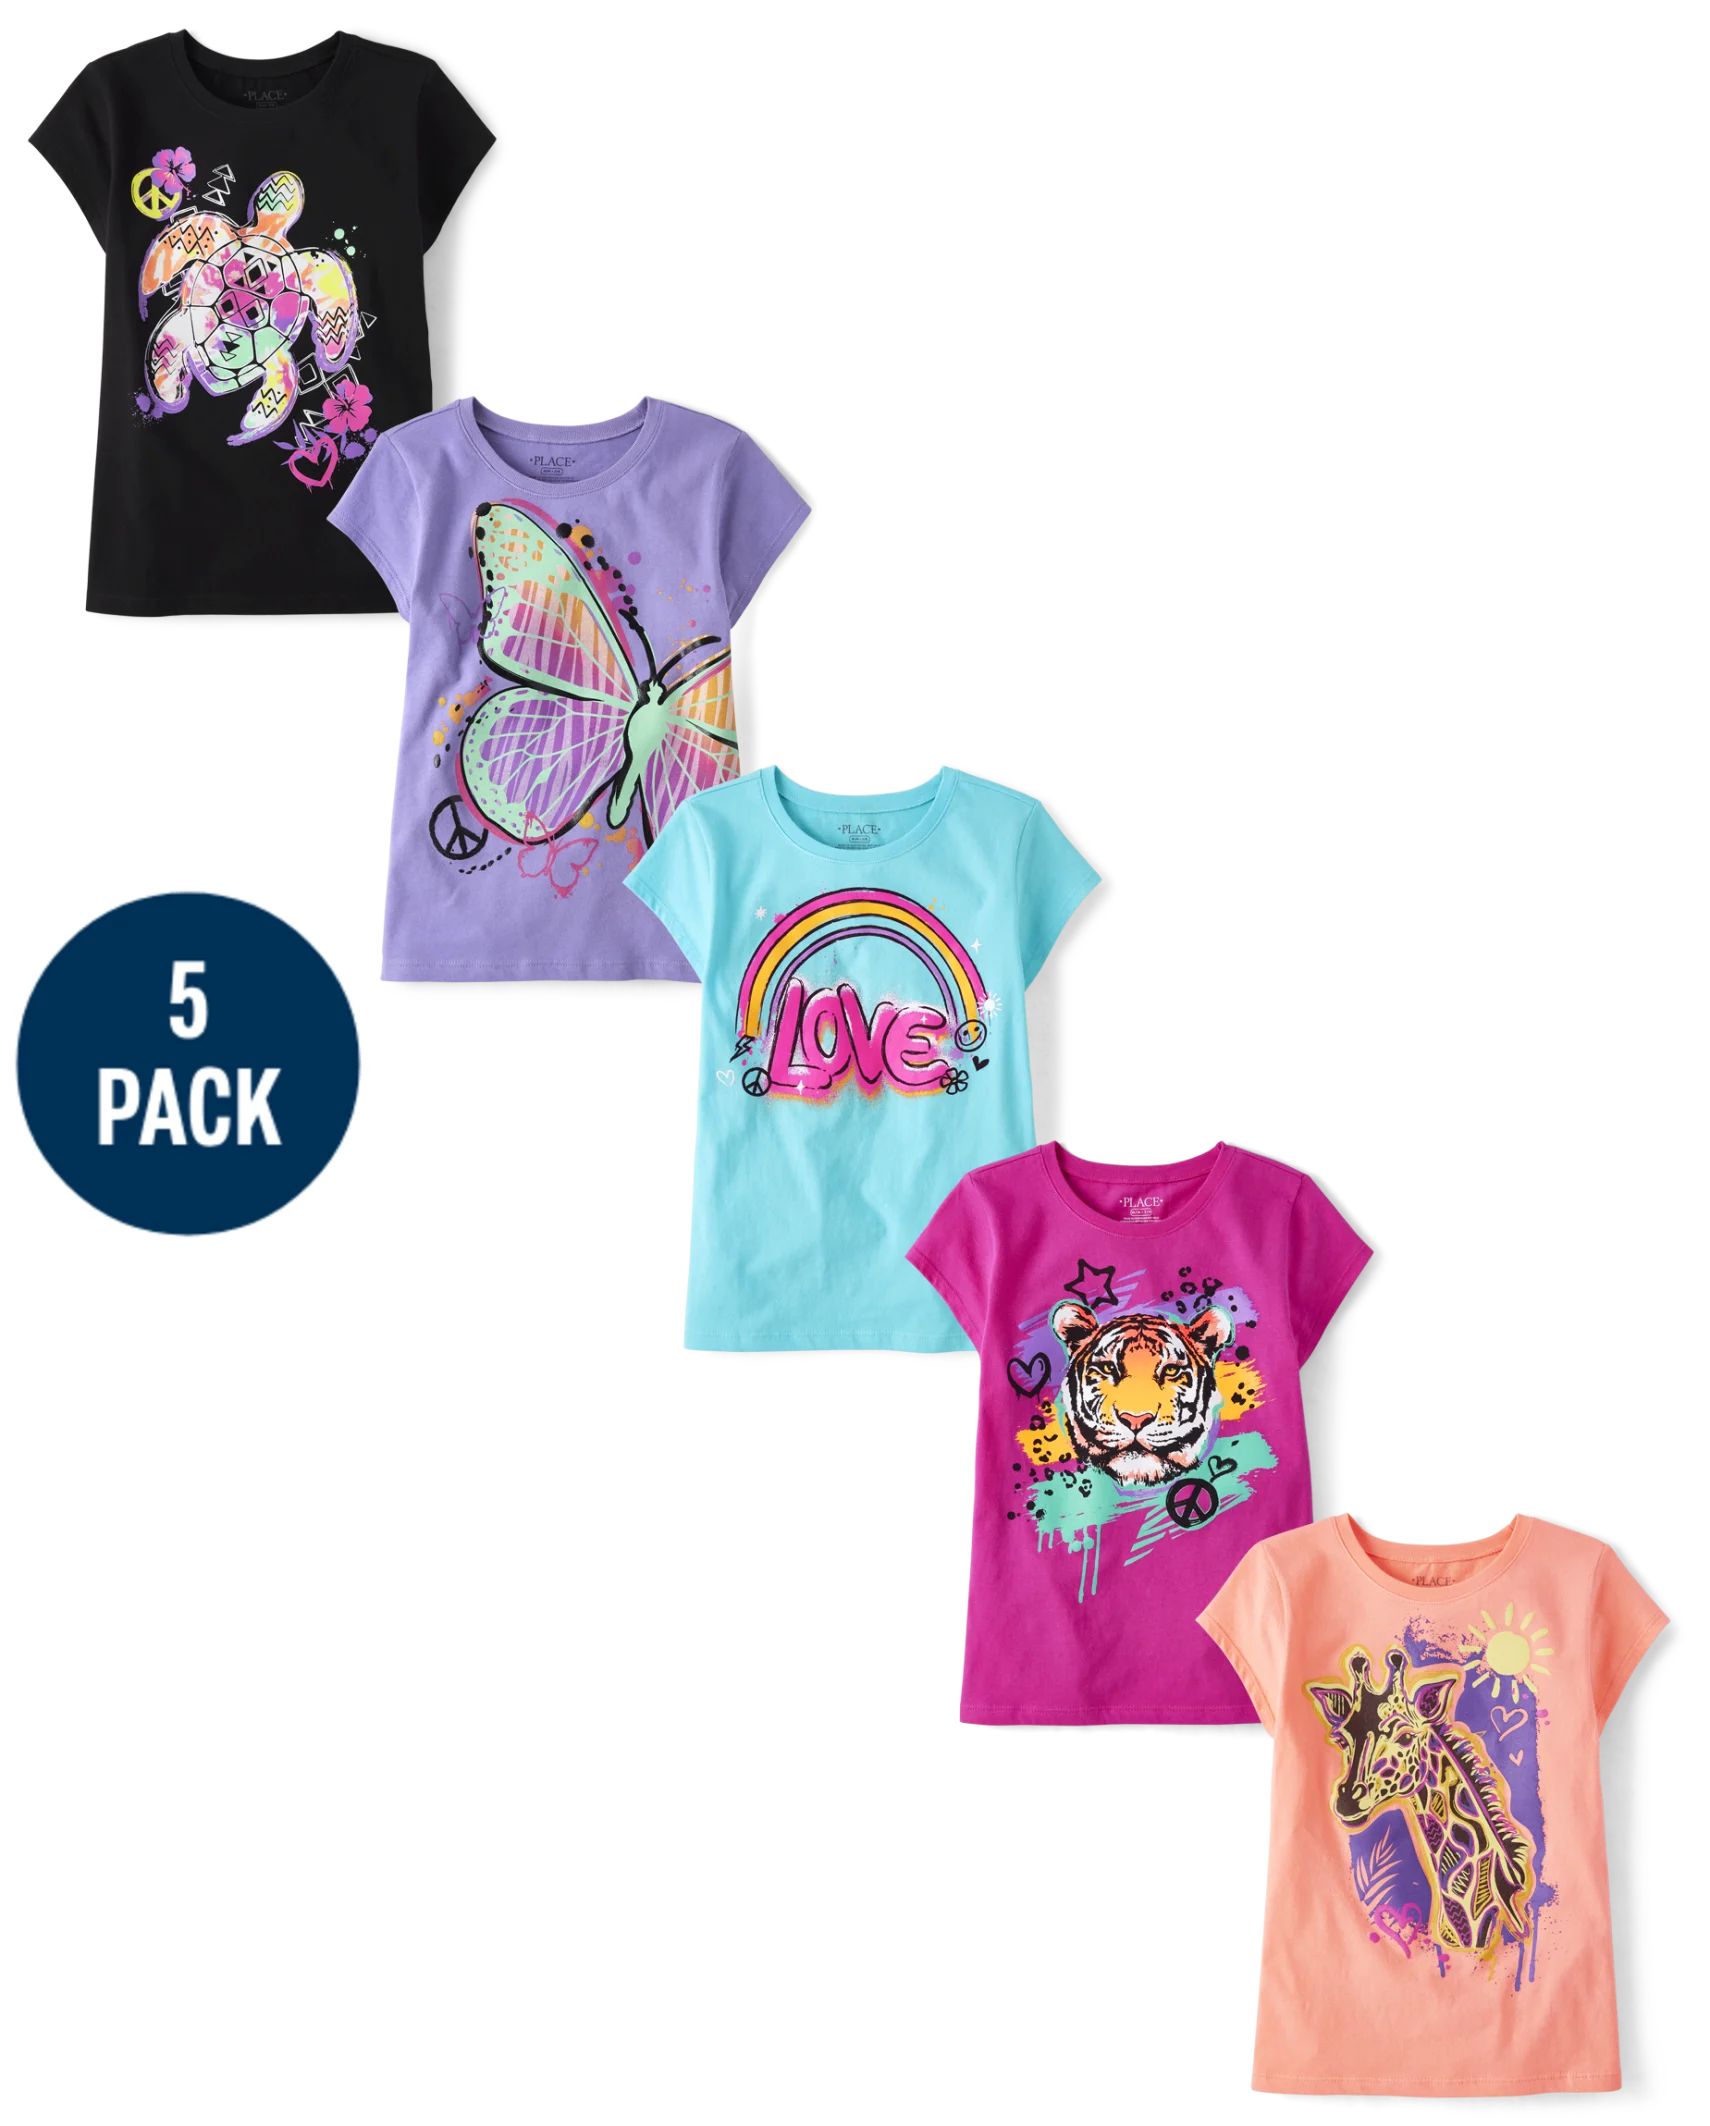 Girls Animal Graphic Tee 5-Pack - multi clr | The Children's Place